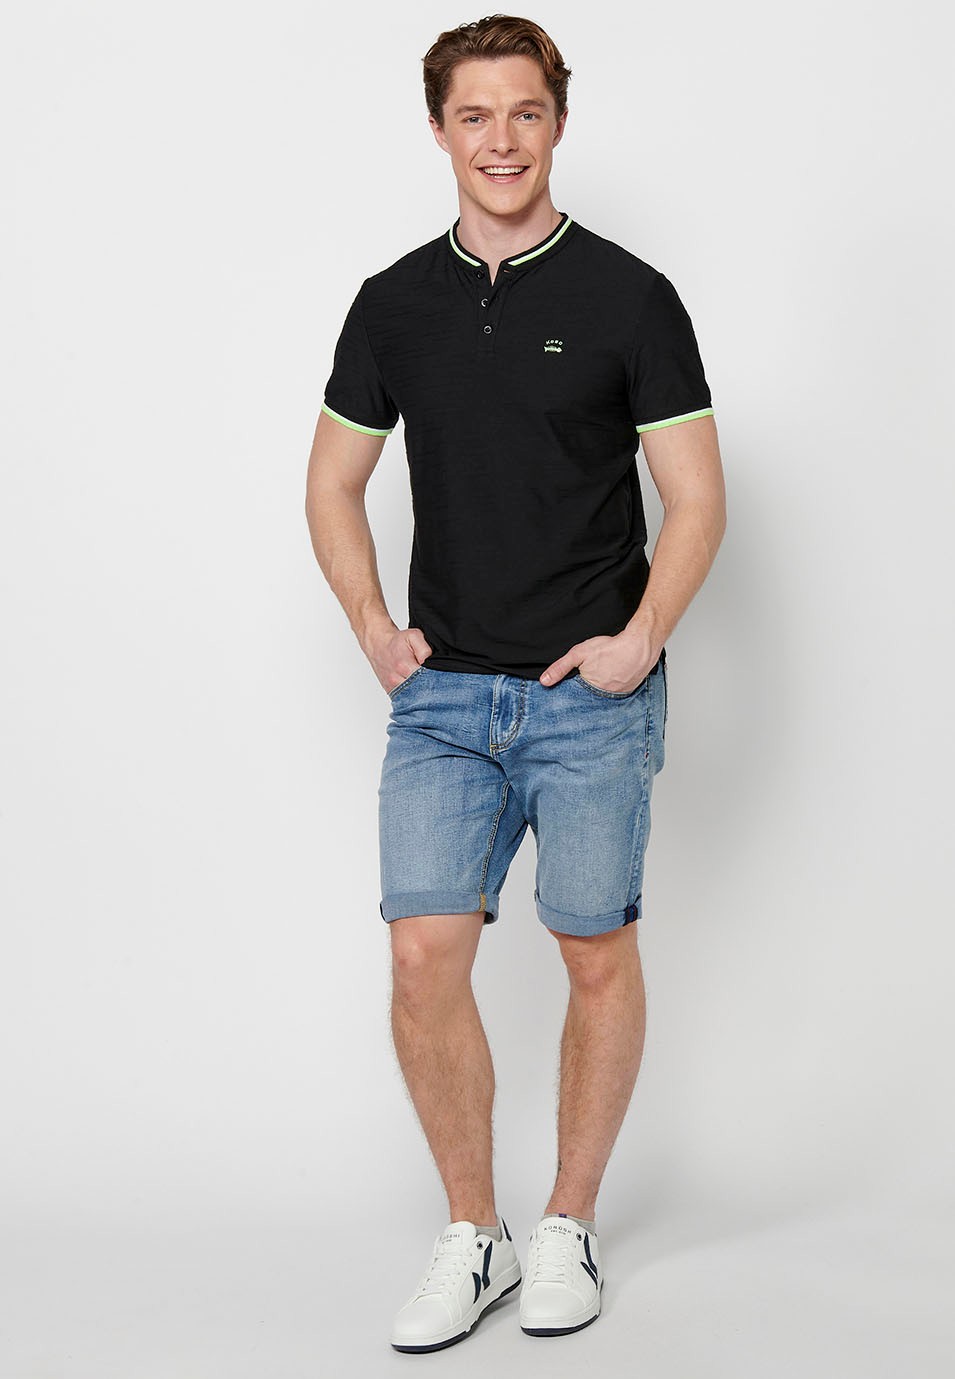 Short-sleeved Polo Shirt with Round Neck with buttoned opening and Finish with side slits in Black for Men 3